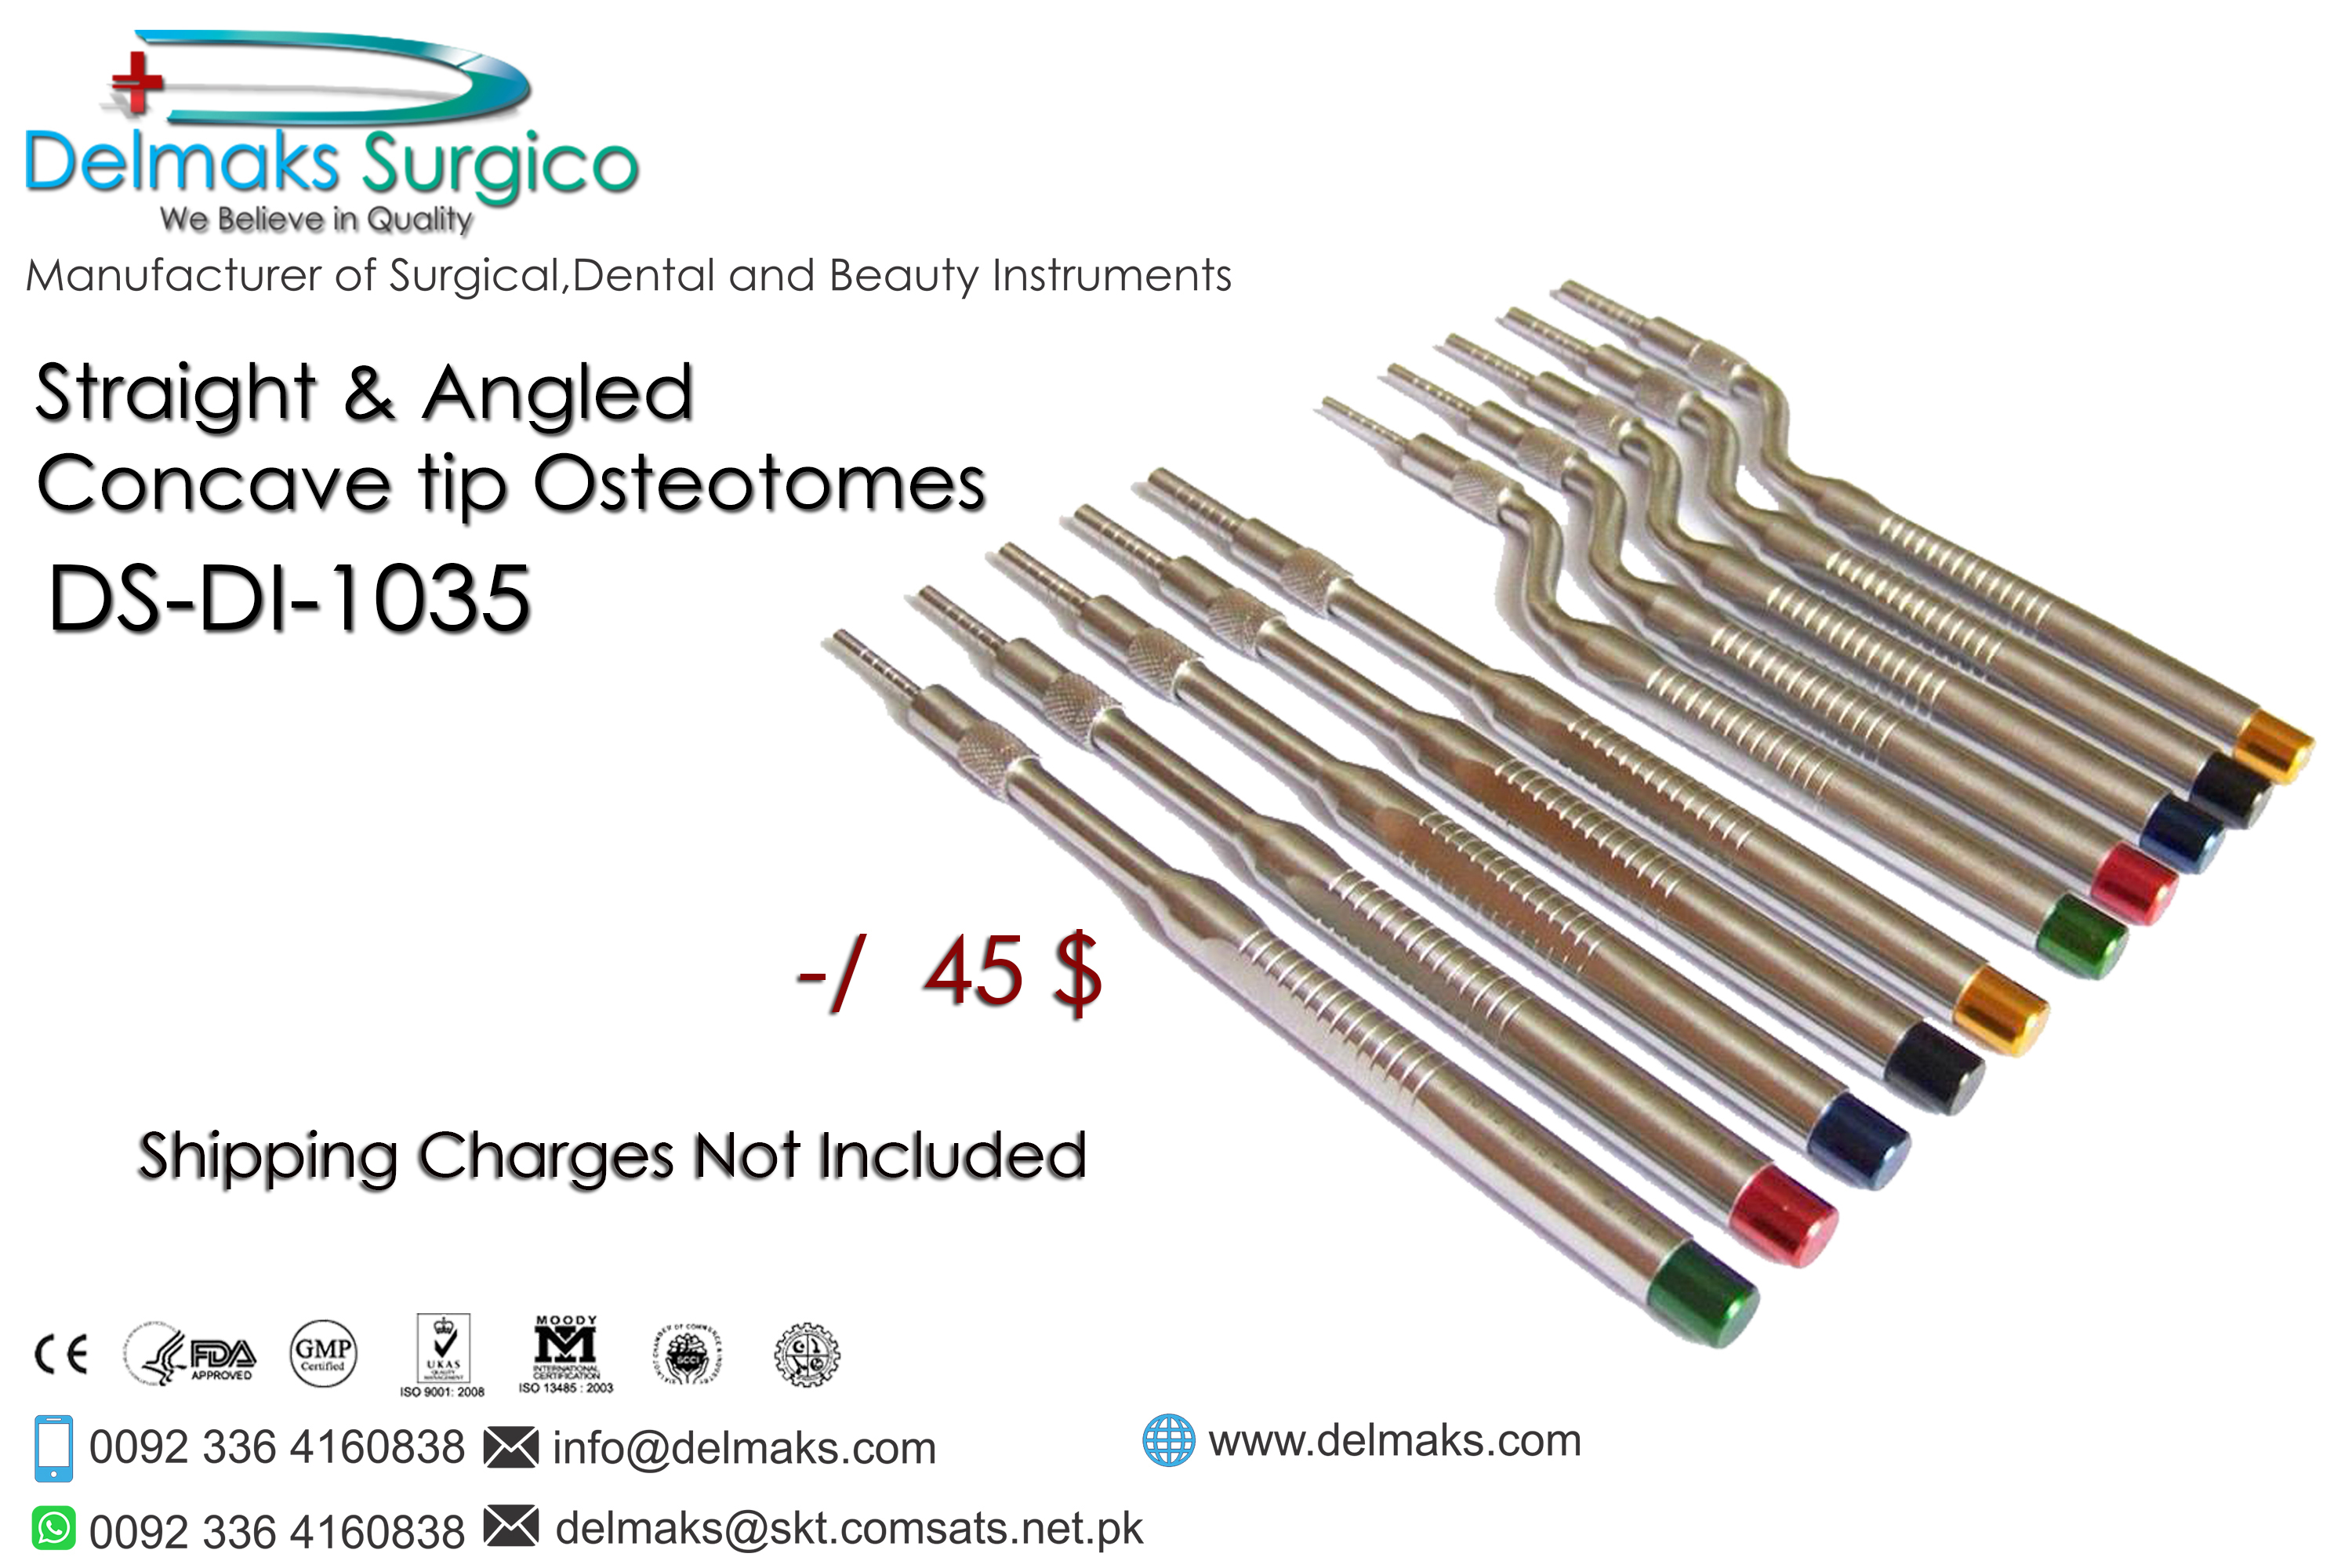 Set of 10 Straight & Angled Concave tip Osteotomes-Dental Implants-Dental Instruments-Delmaks Surgico